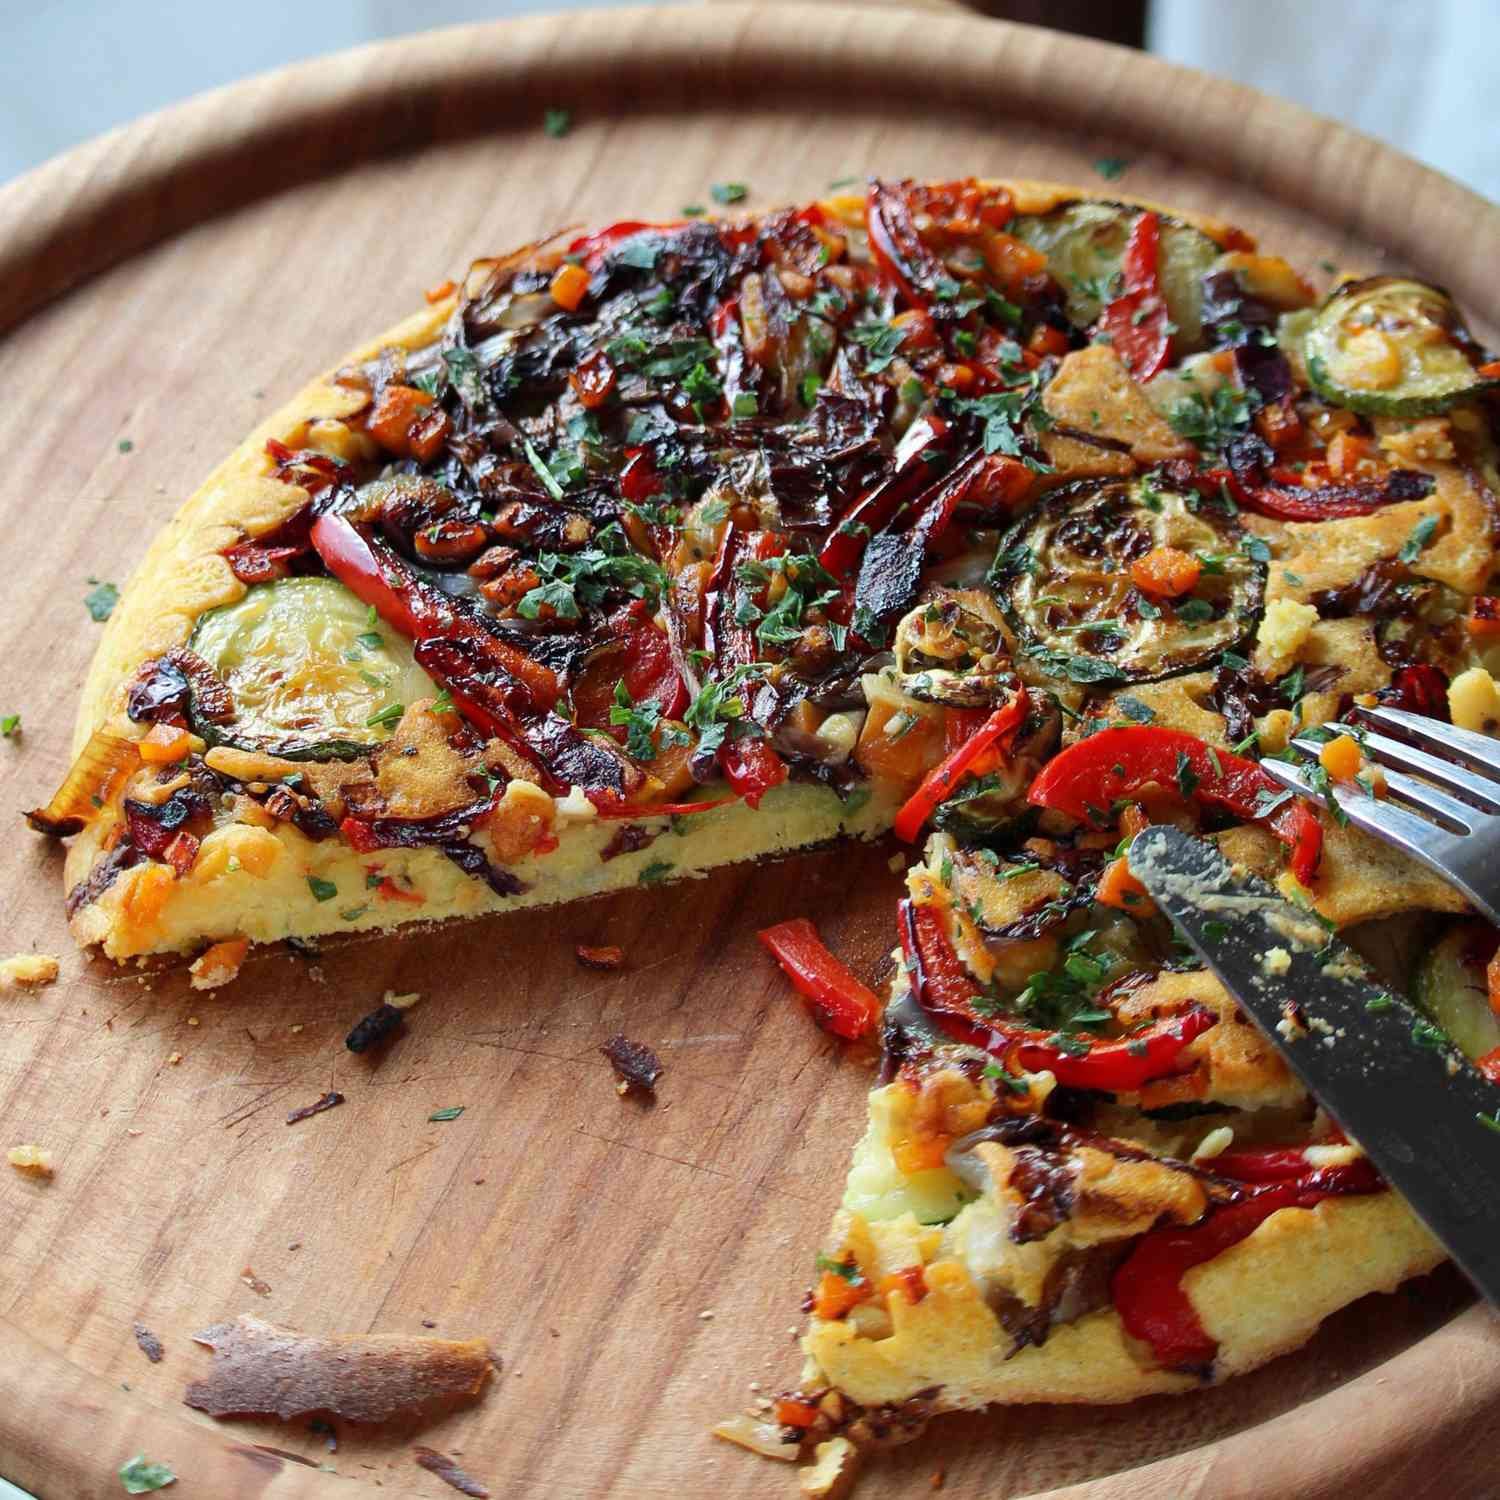 15 Plant-Based Breakfasts to Energize Your Day